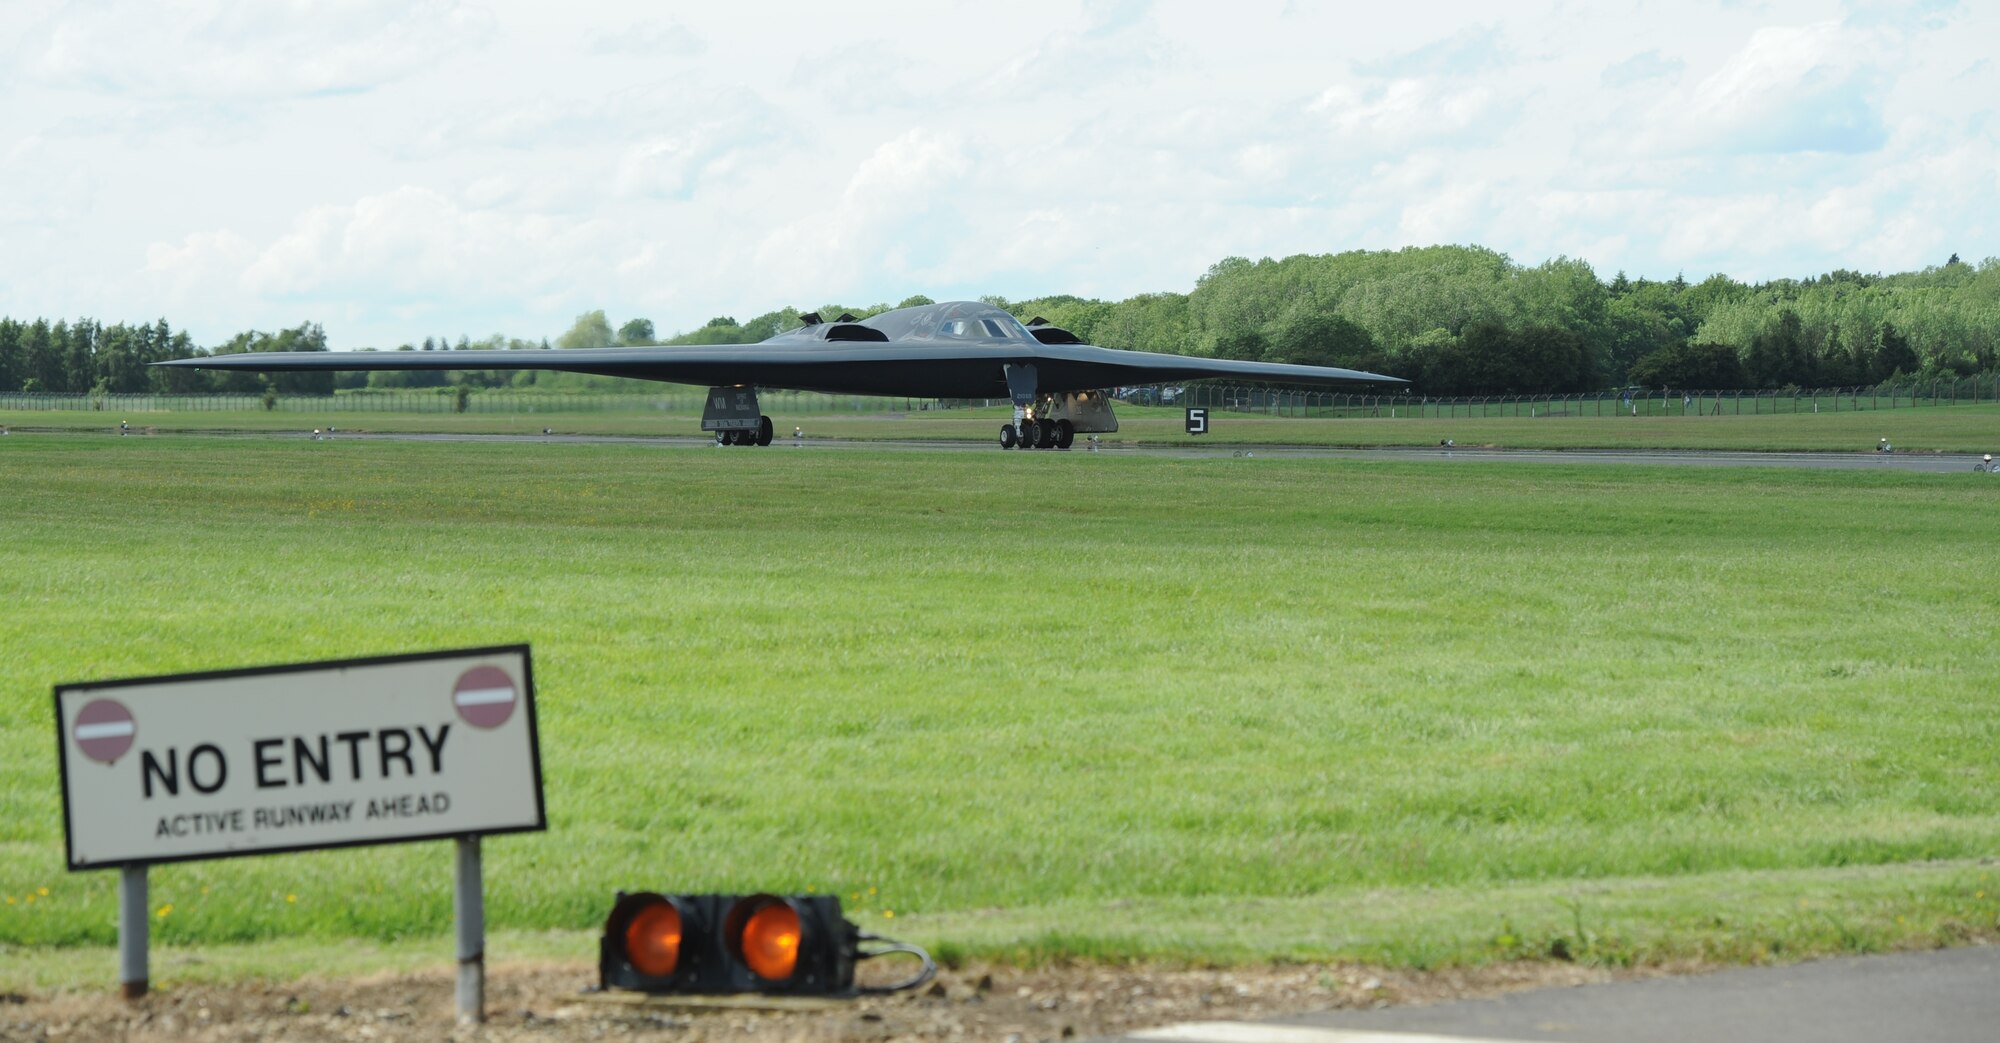 The “Spirit of Indiana,” a B-2 Spirit from Whiteman Air Force Base, Mo., taxis down the runway at RAF Fairford, England, June 8, 2014. The B-2 Spirit is a multi-role bomber capable of delivering both conventional and nuclear munitions. (U.S. Air Force photo by Staff Sgt. Nick Wilson/Released)